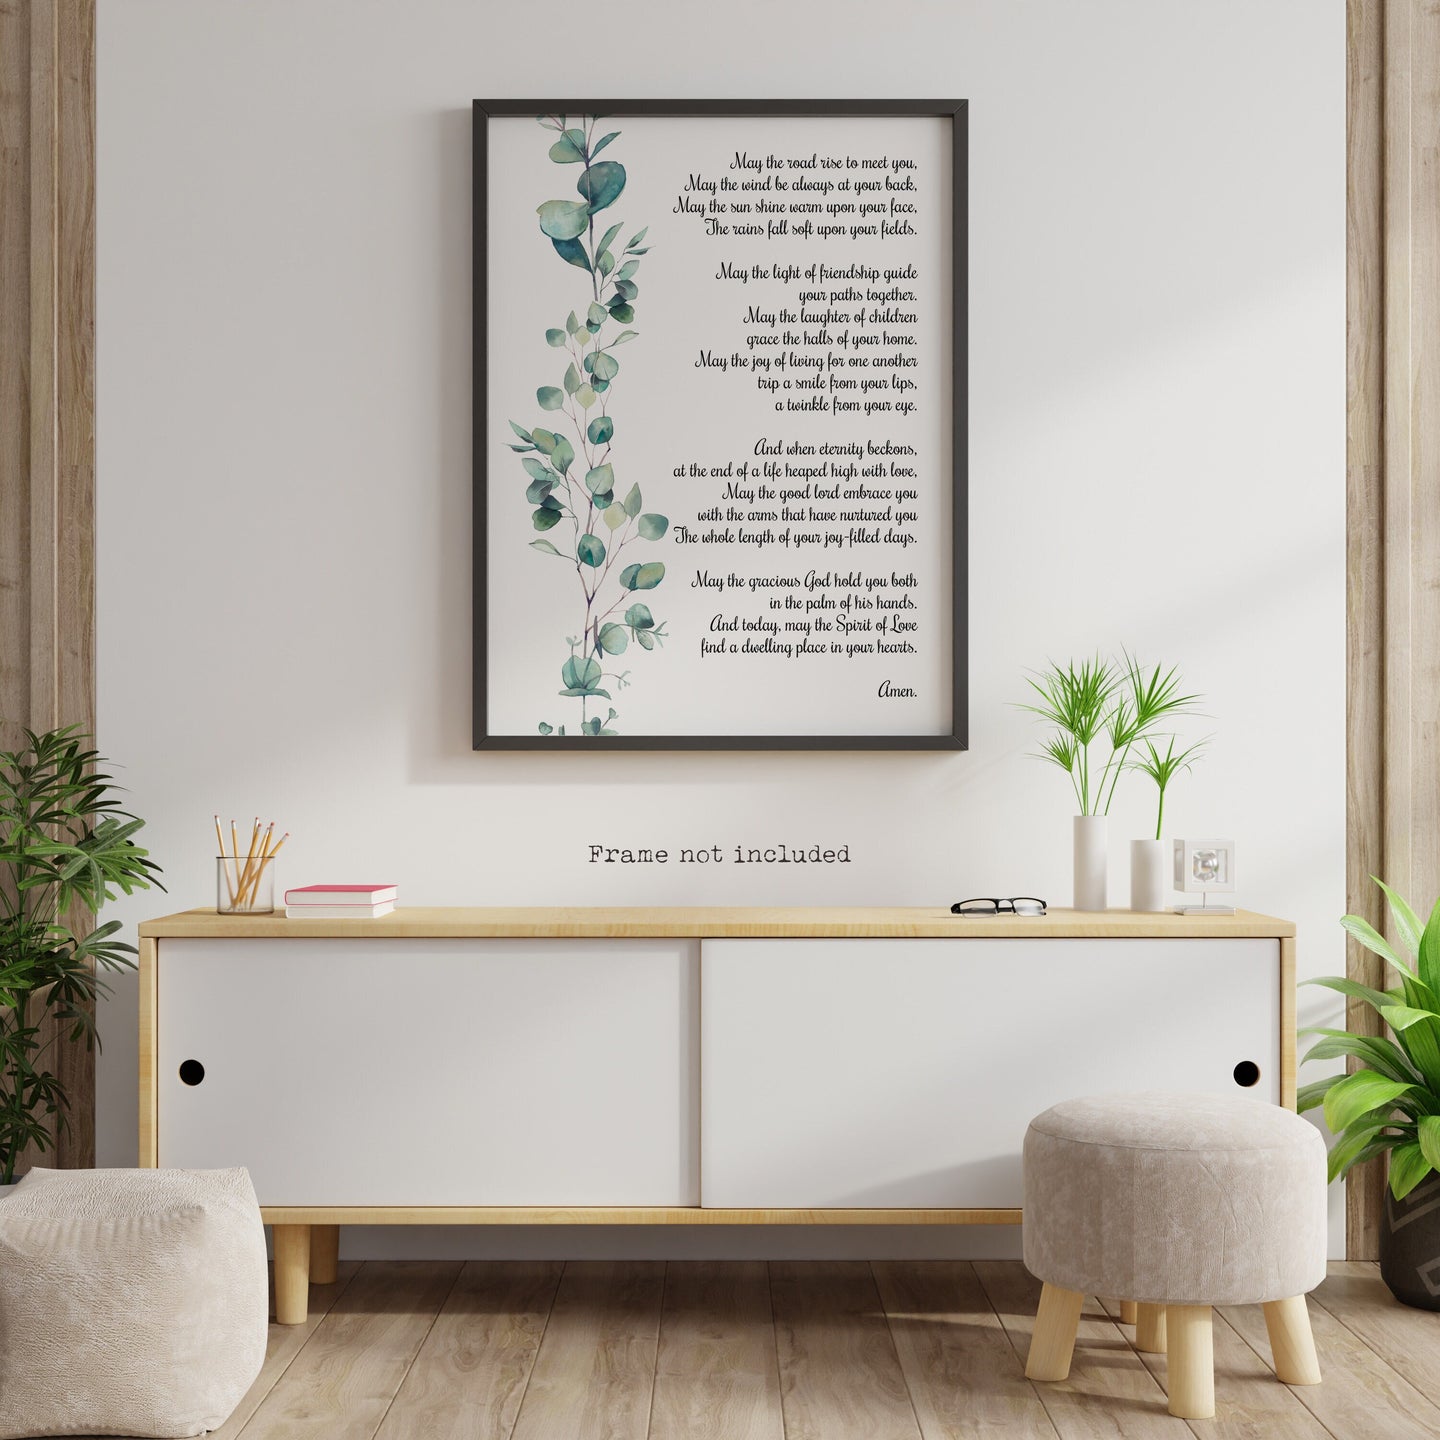 Irish wedding blessing - May the road rise up to meet you - UNFRAMED wall art print